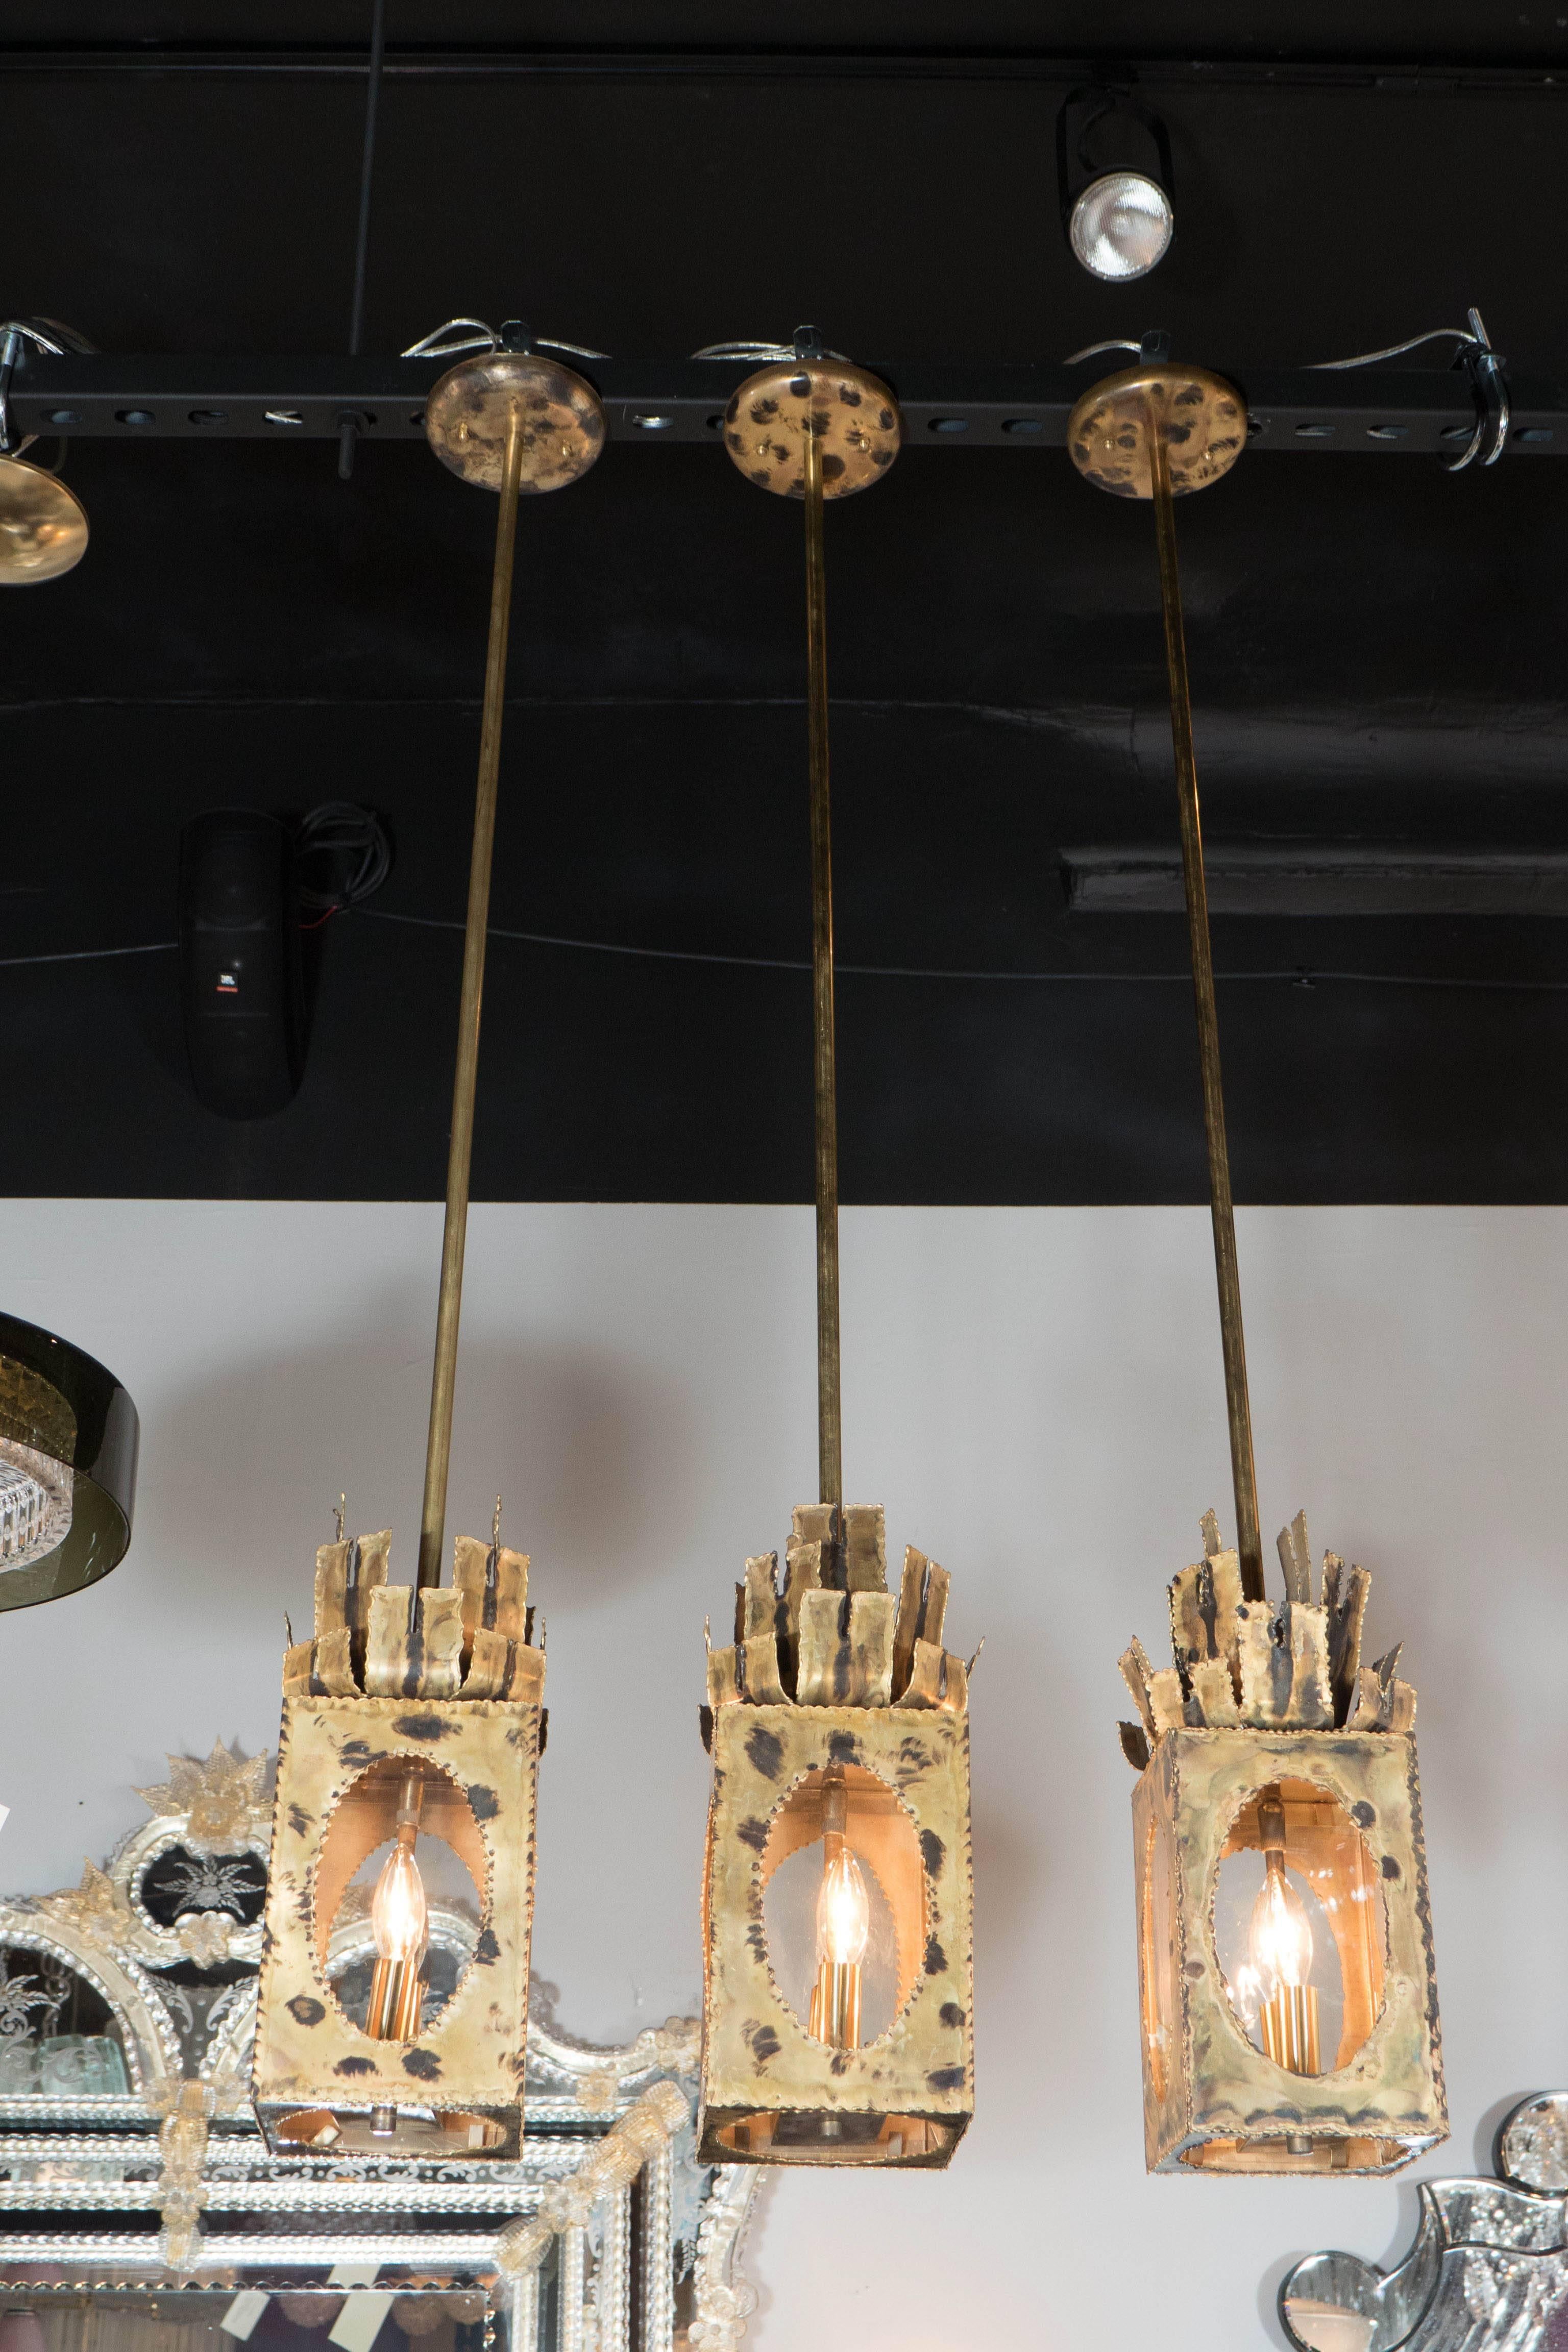 A terrific Mid-Century Modernist Brutalist pendant by Tom Greene featuring torch-cut patinated brass box frame that holds a single bulb. Its top offers sculptural segments mimicking stylized lanterns, or flames. A really exquisite burnt effect from